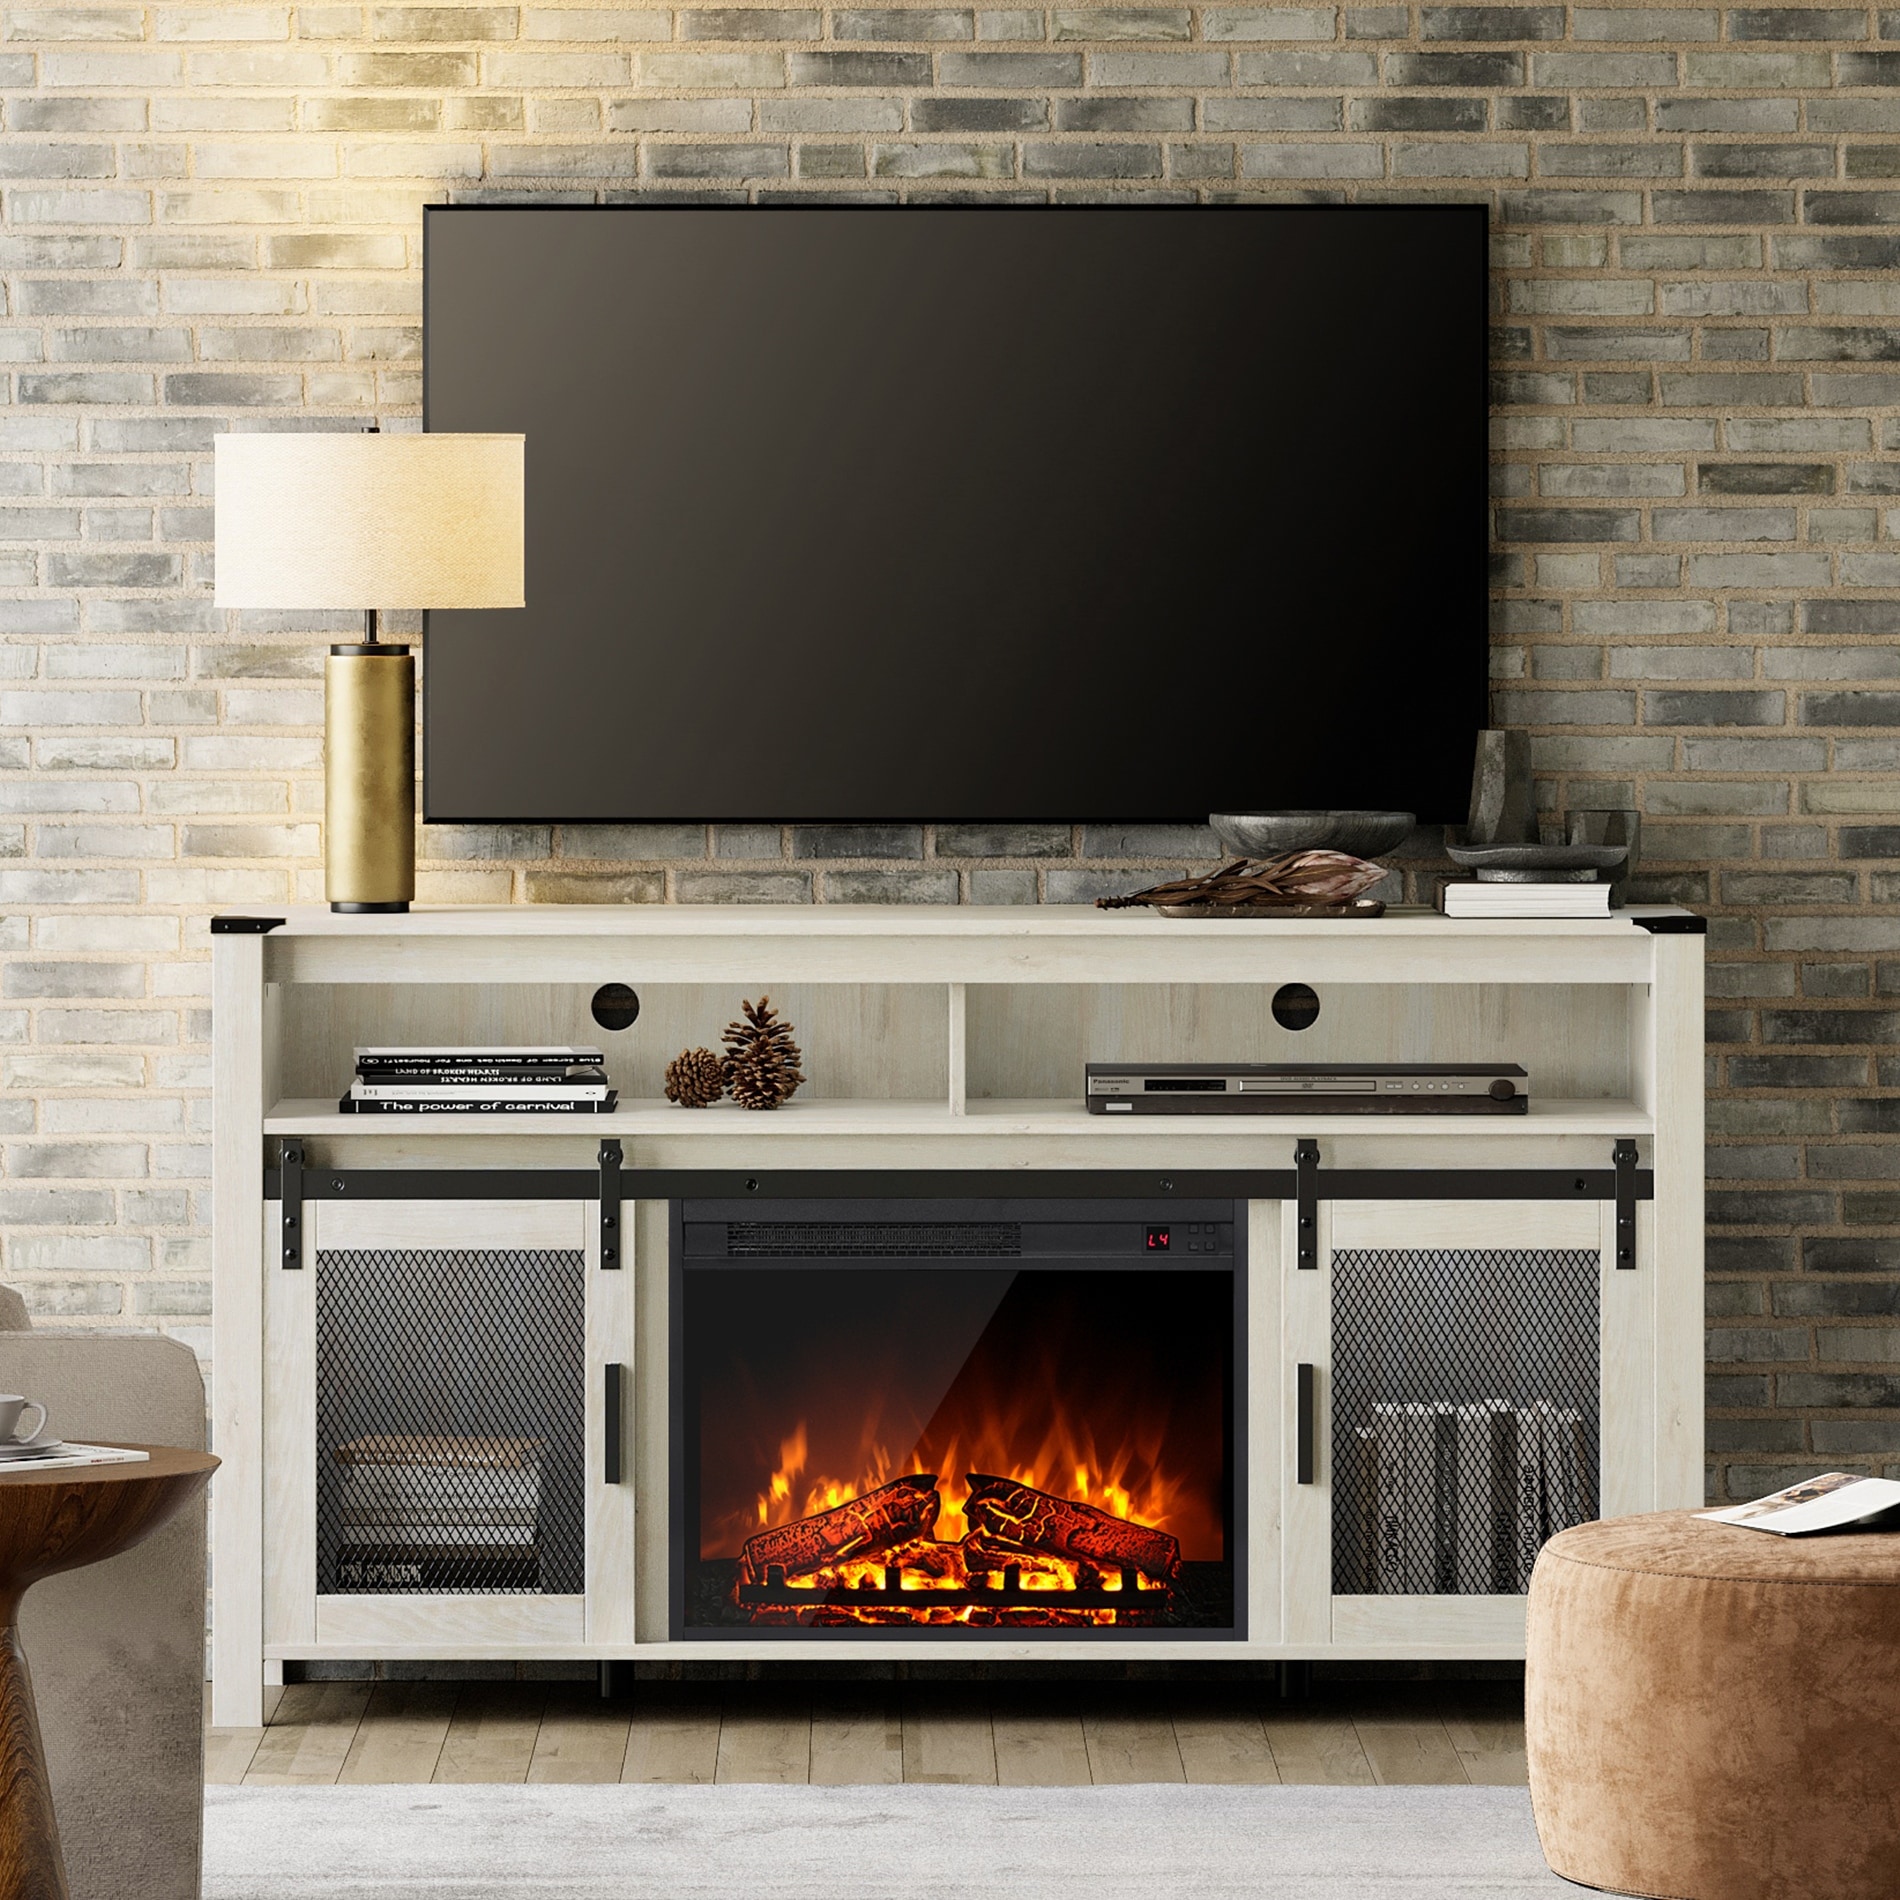 https://ak1.ostkcdn.com/images/products/is/images/direct/42c303e2e111cd59871047bc18935c6b40667d8e/Rustic-Wood-Fireplace-TV-Stand-with-Mesh-Barn-Doors-for-Living-Room.jpg